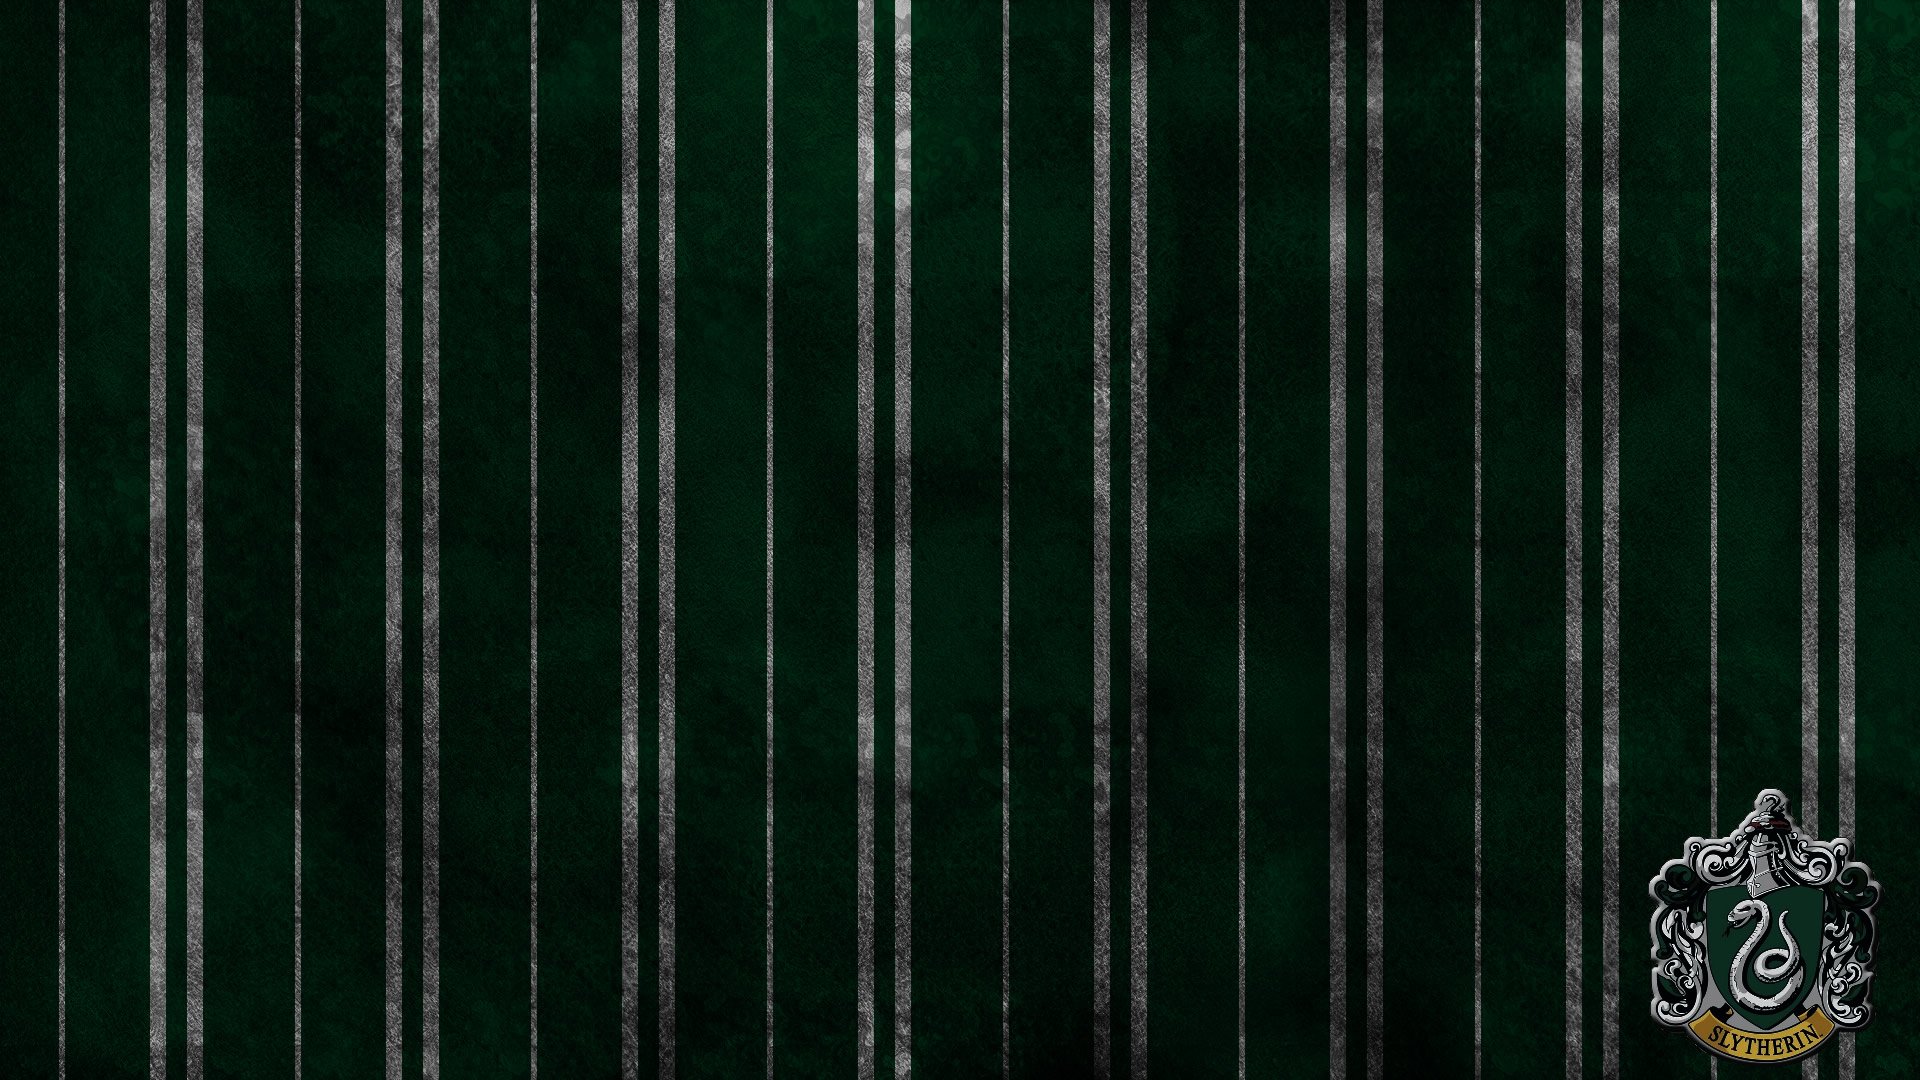 slytherin wallpapers hd stay staywallpaper 1920x1080